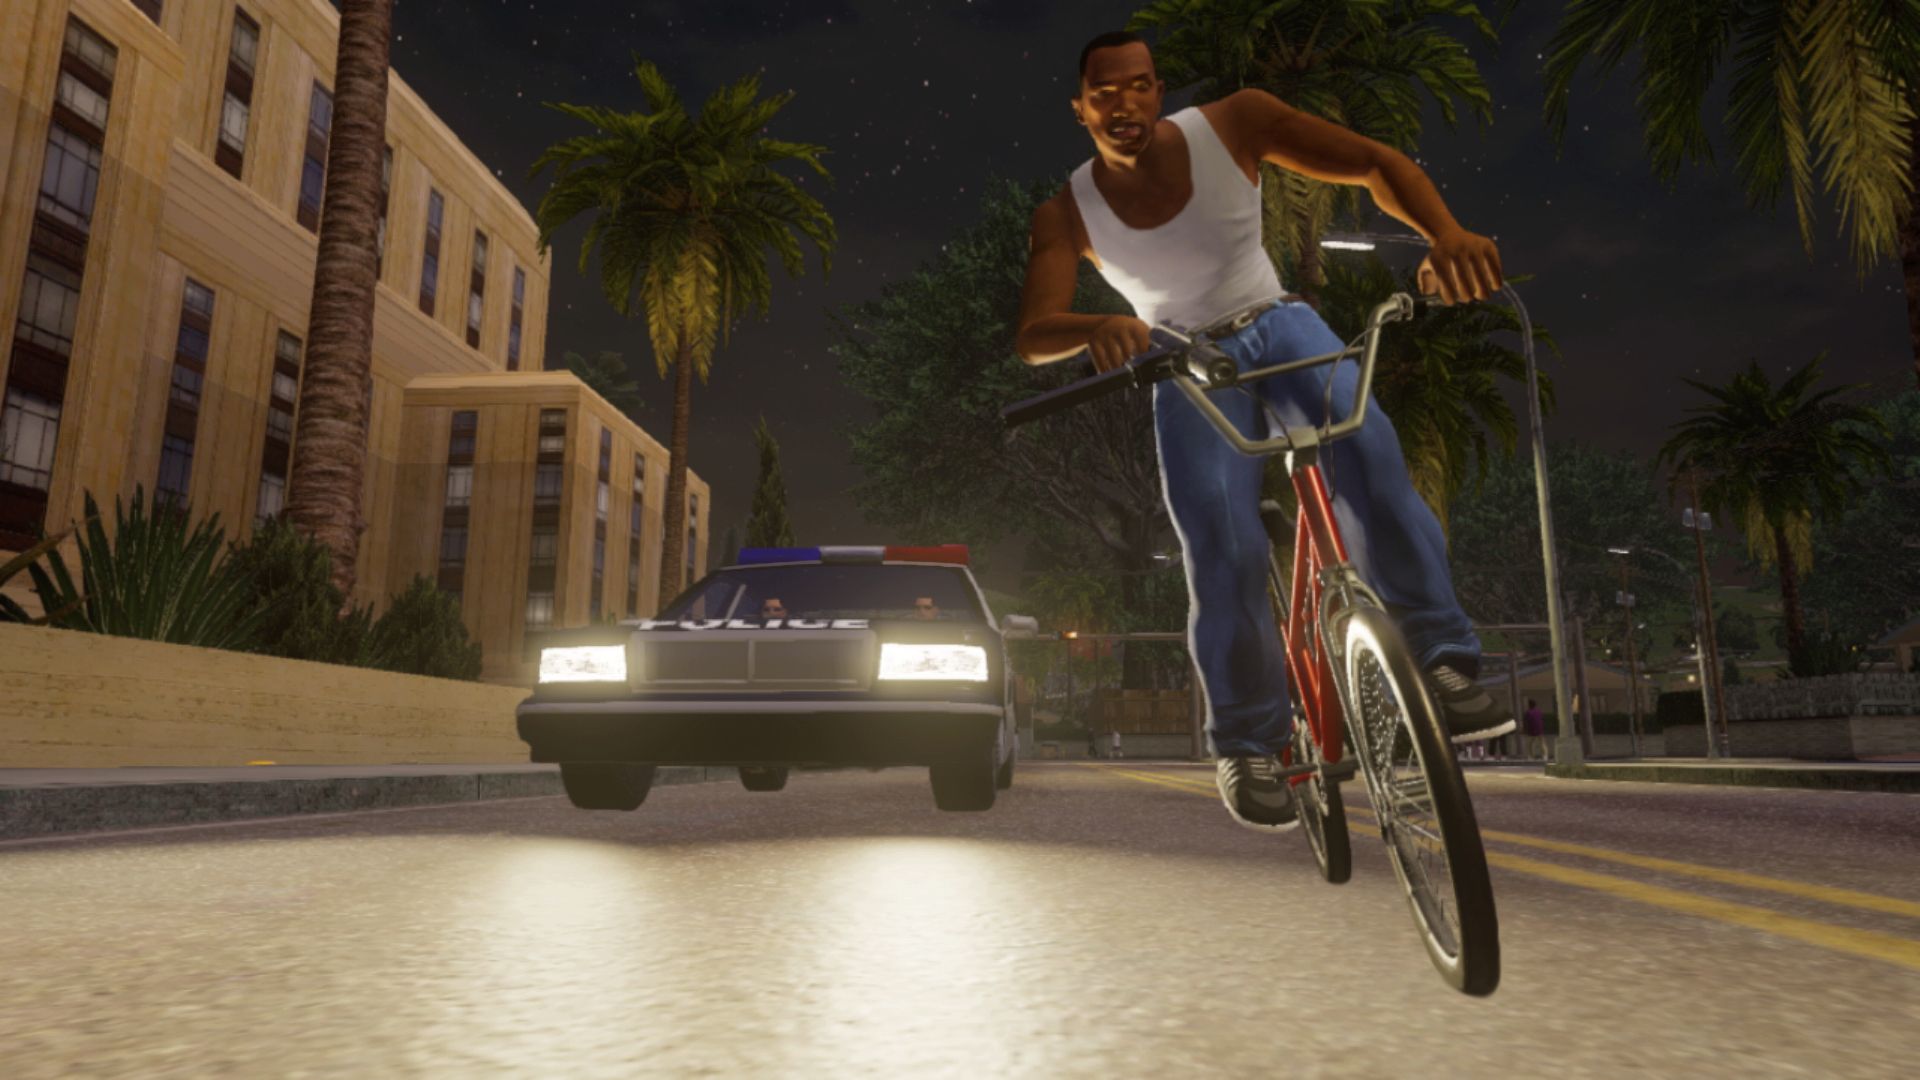 Gta The Trilogy The Definitive Edition San Andreas Switch Screen 1 Cca8.jpg